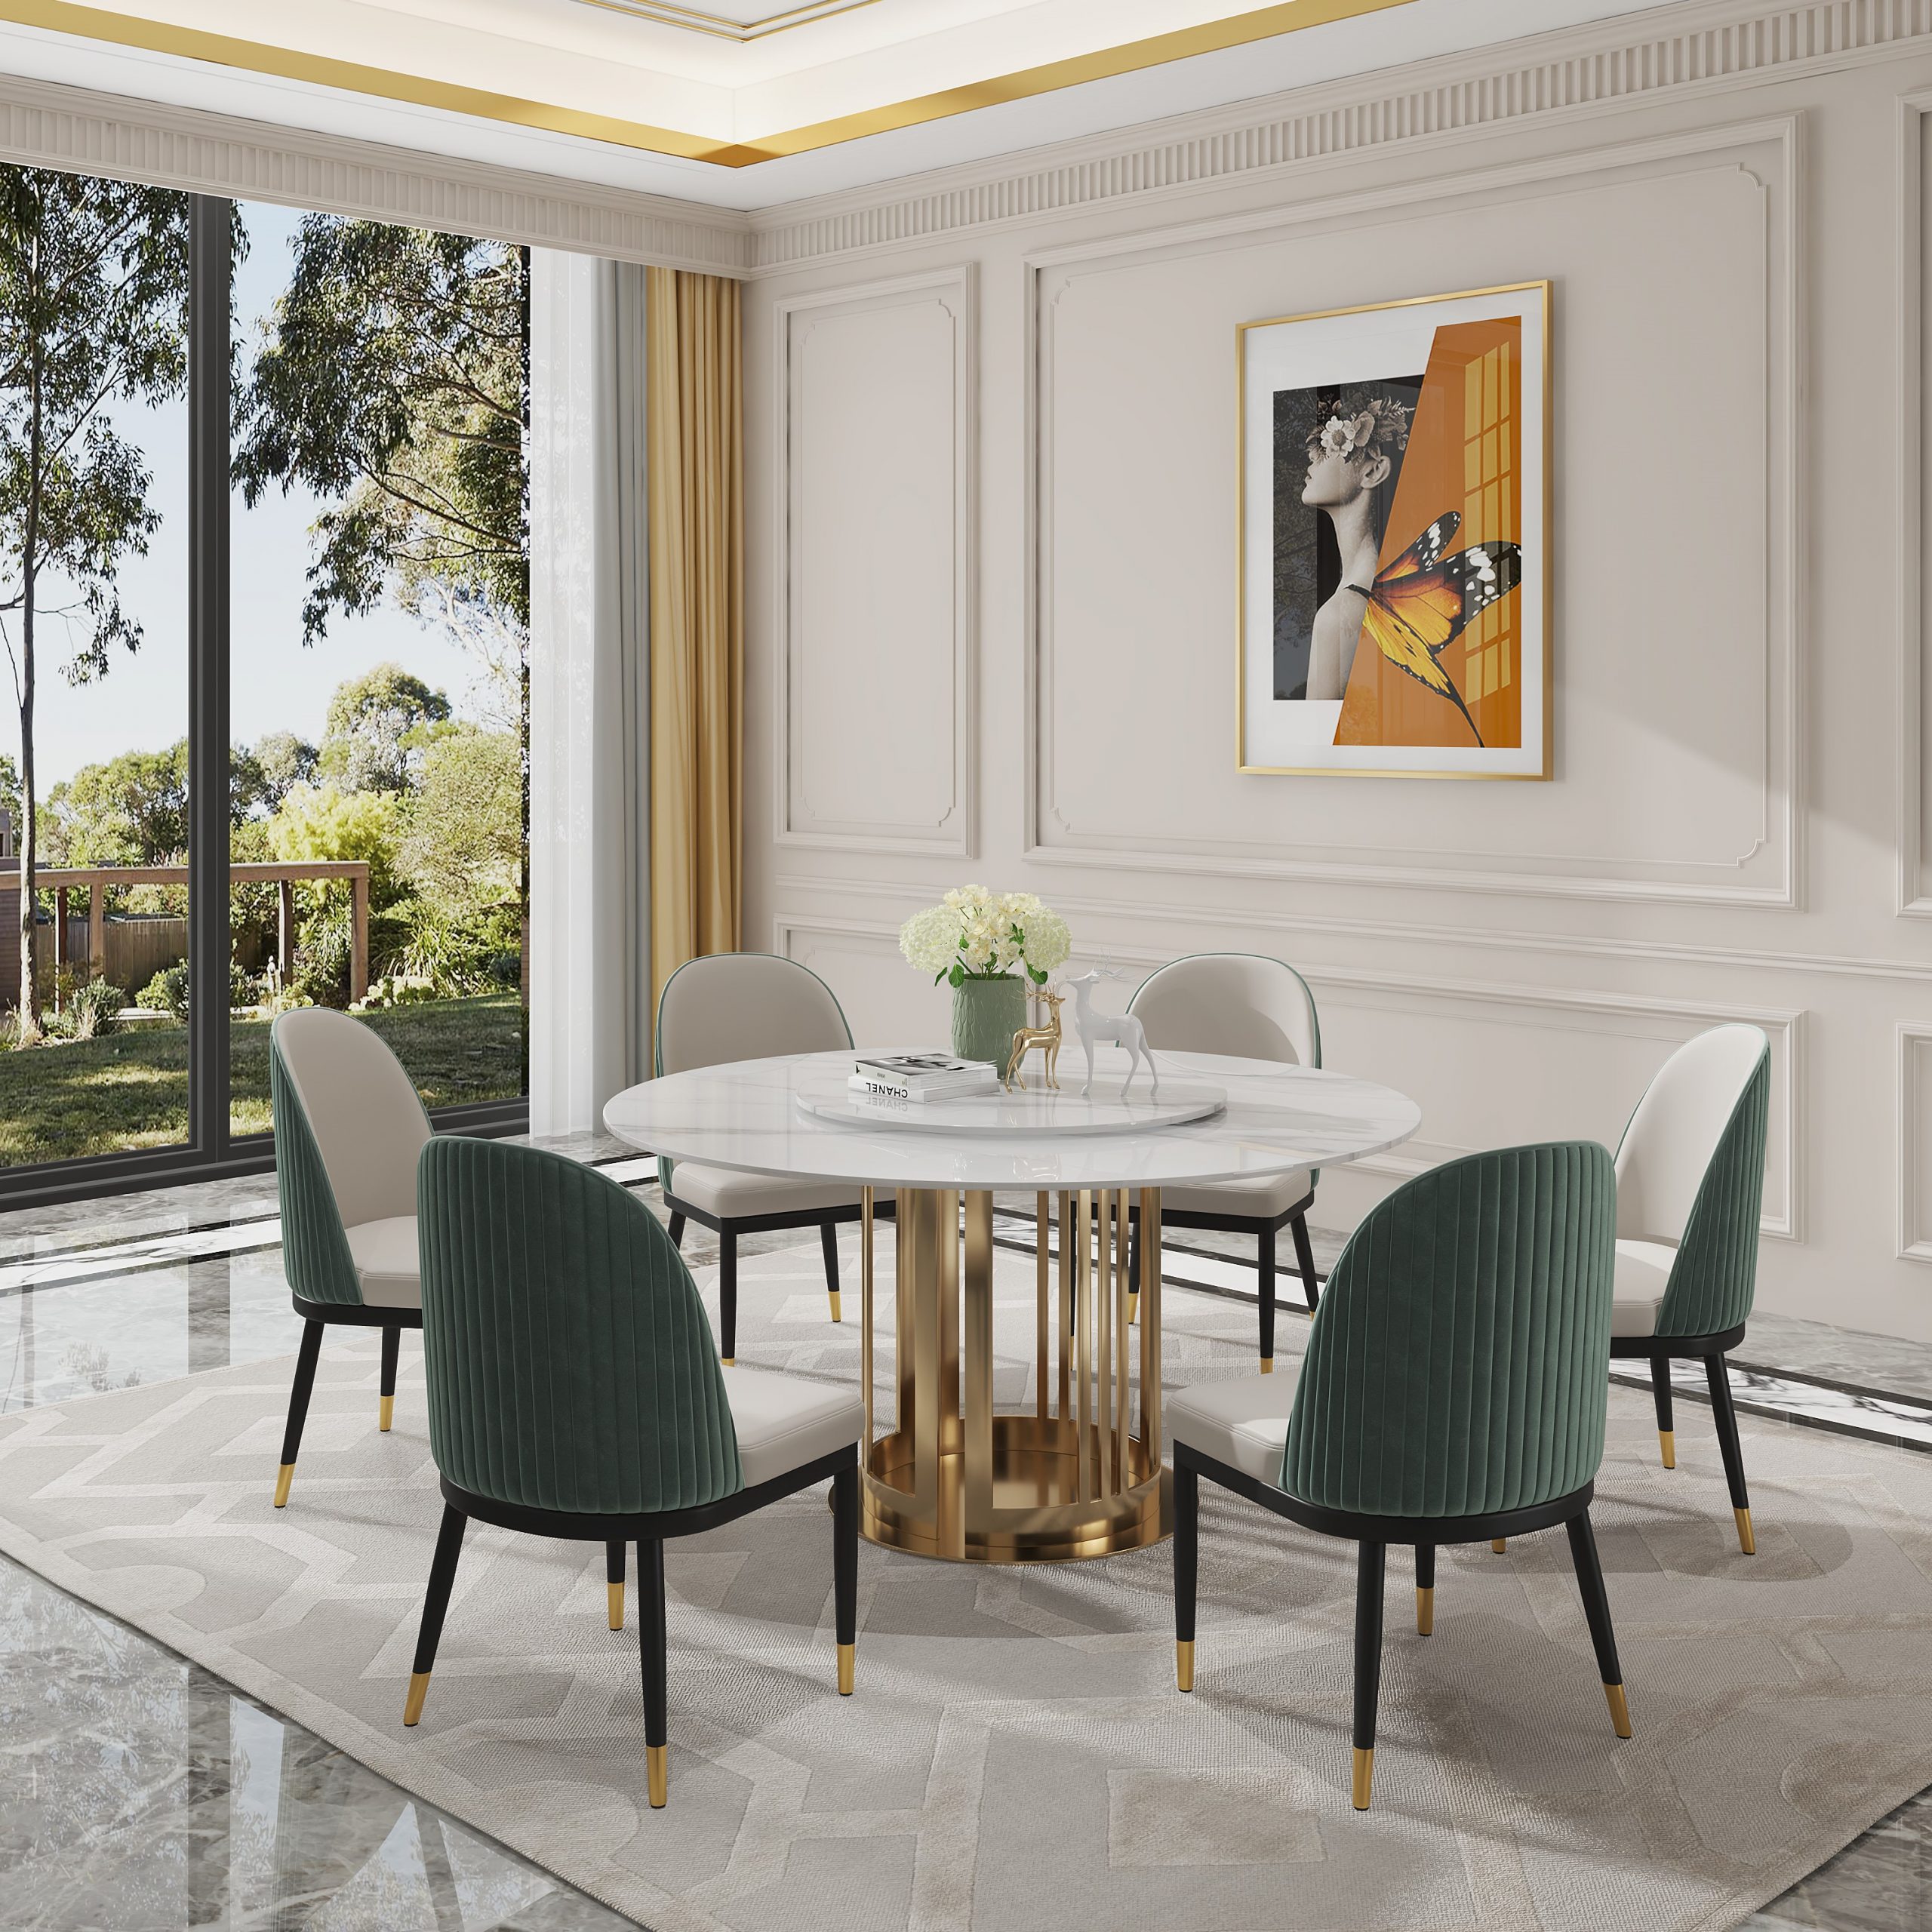 6 Pale Green Dining Chairs & A Modern Dining Table